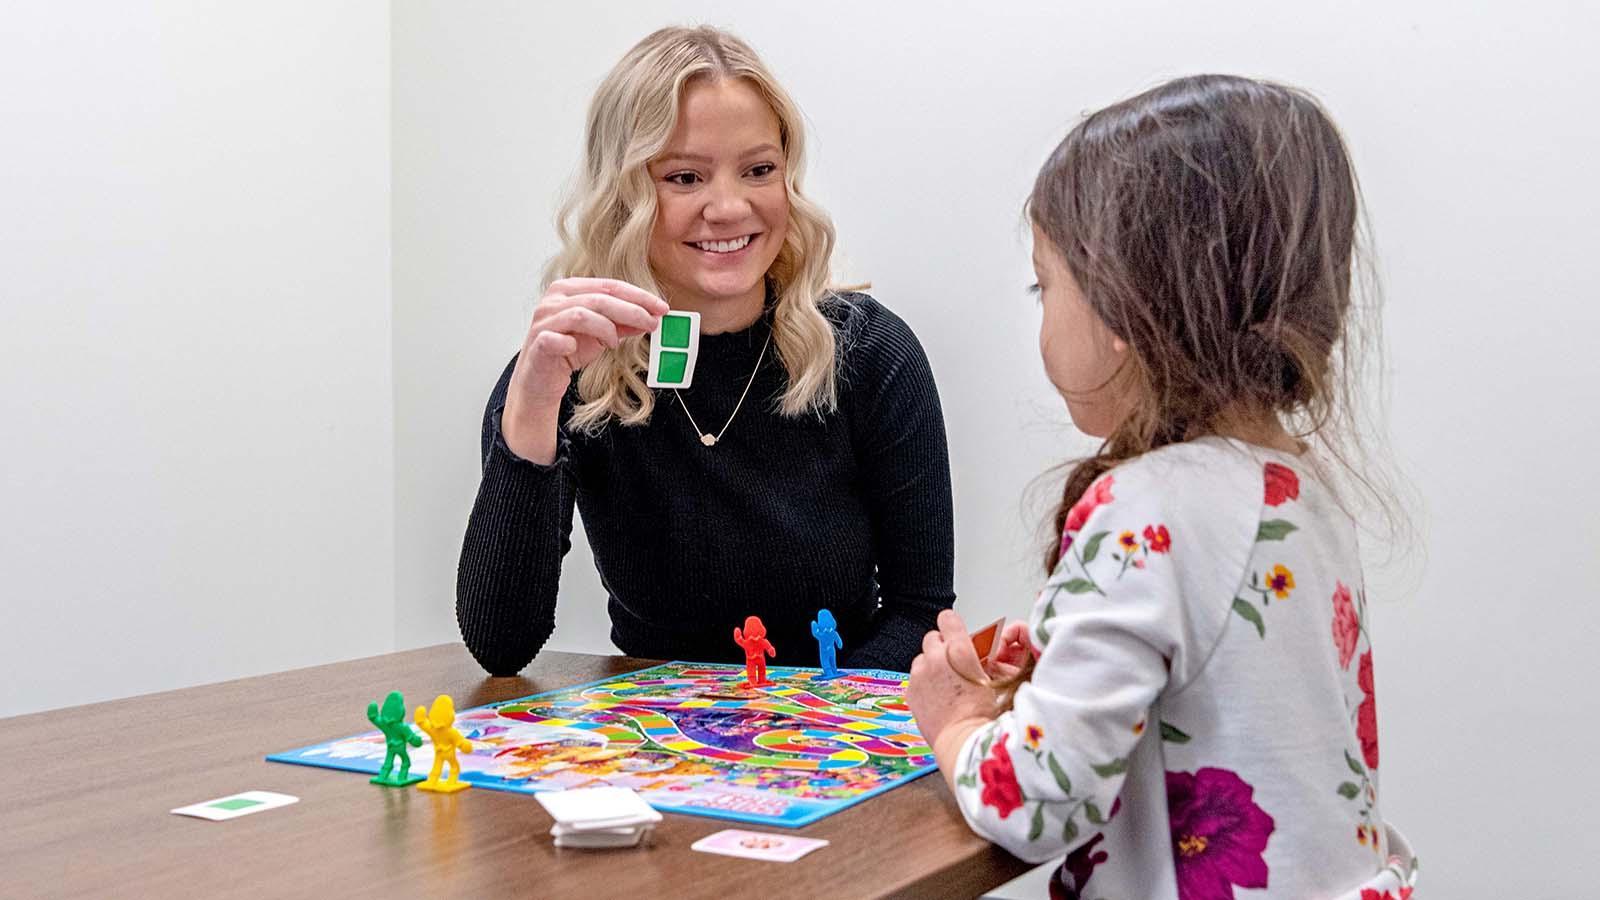 College student playing board game with young girl